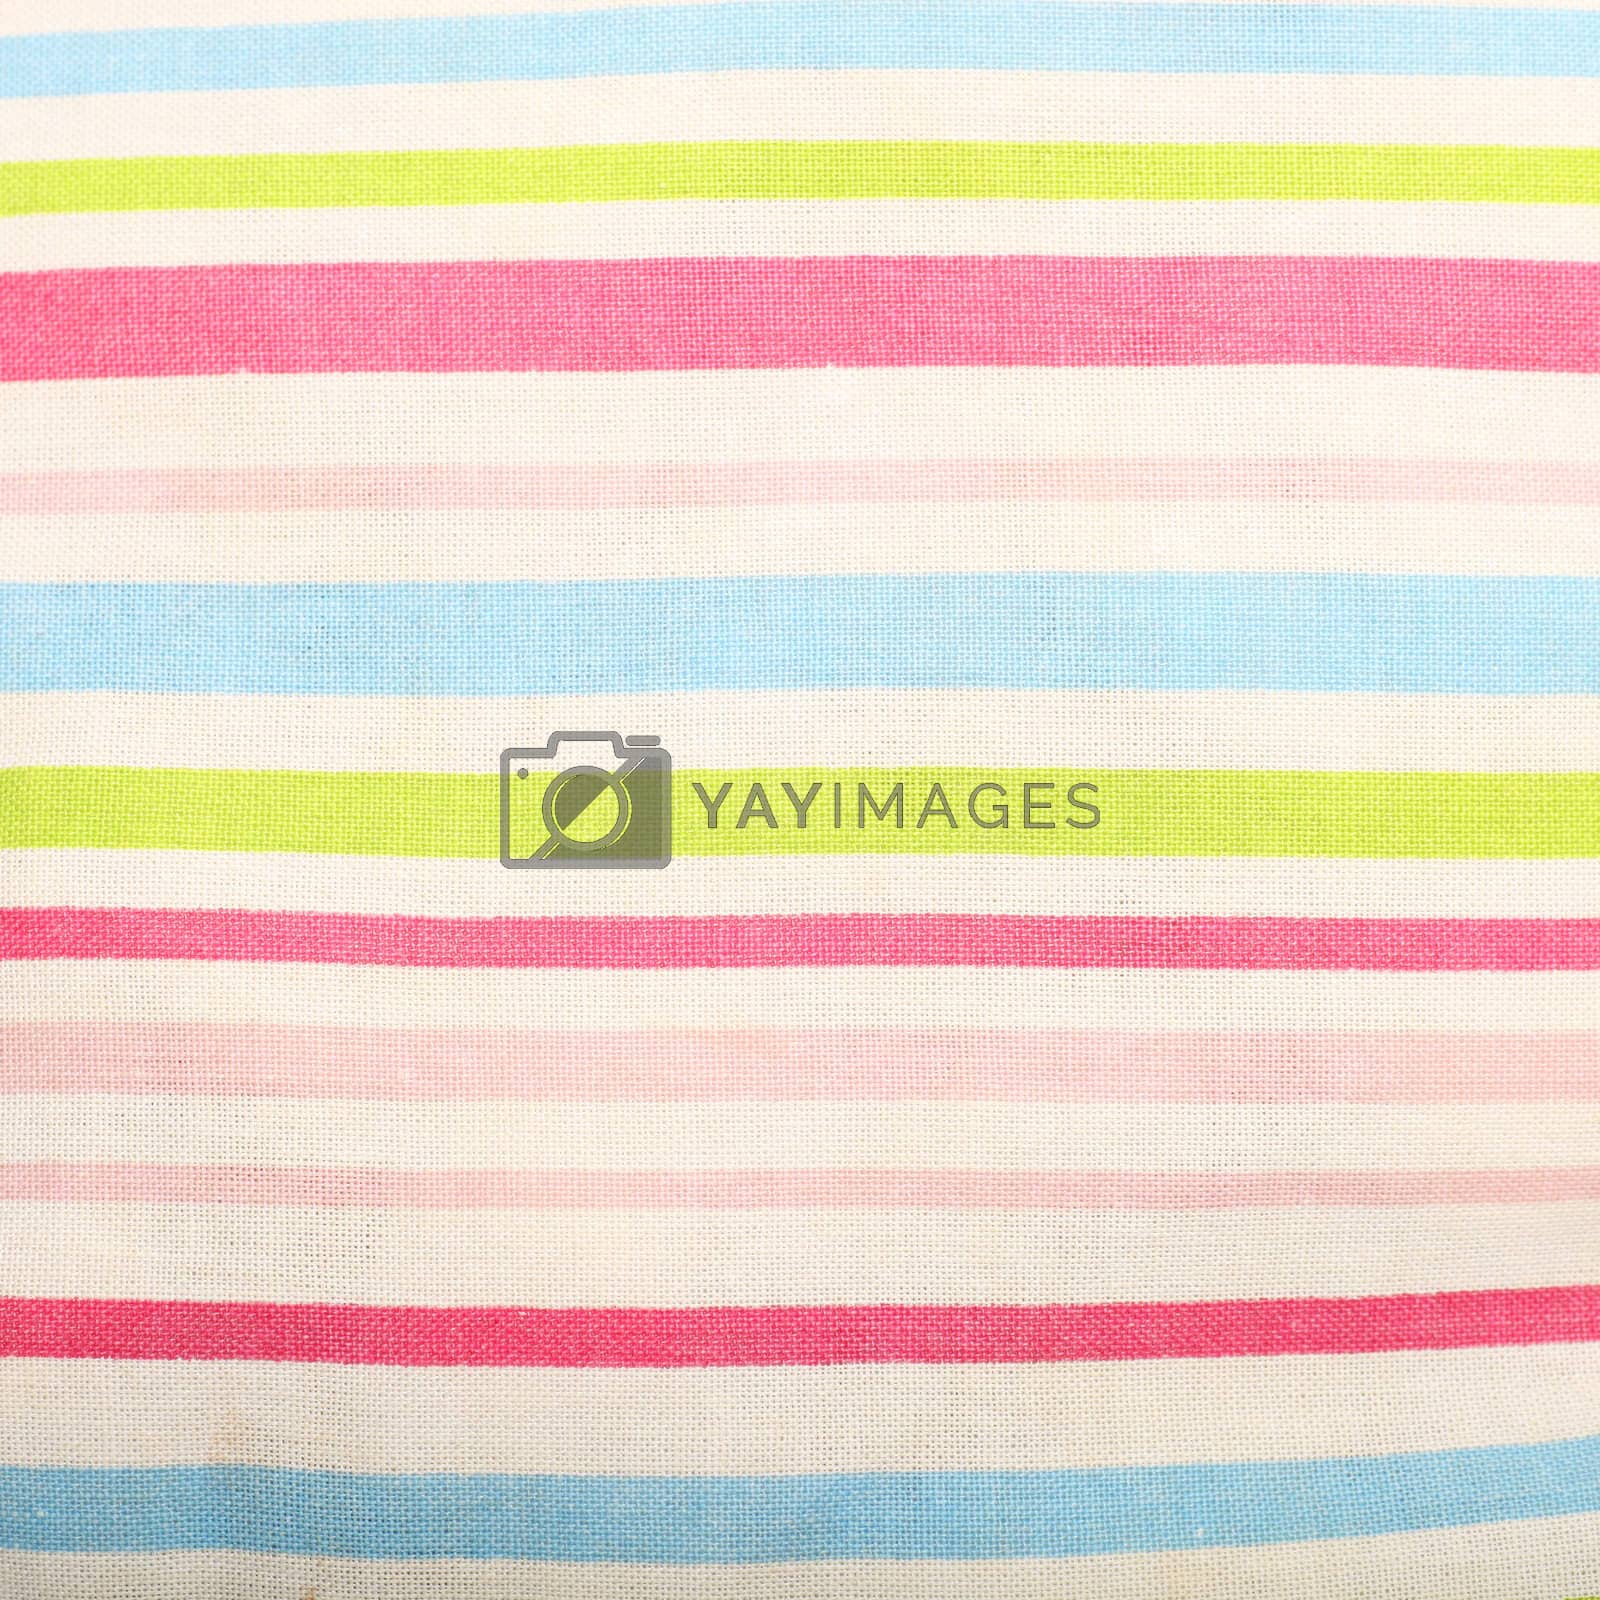 Royalty free image of Striped linen background by Farina6000